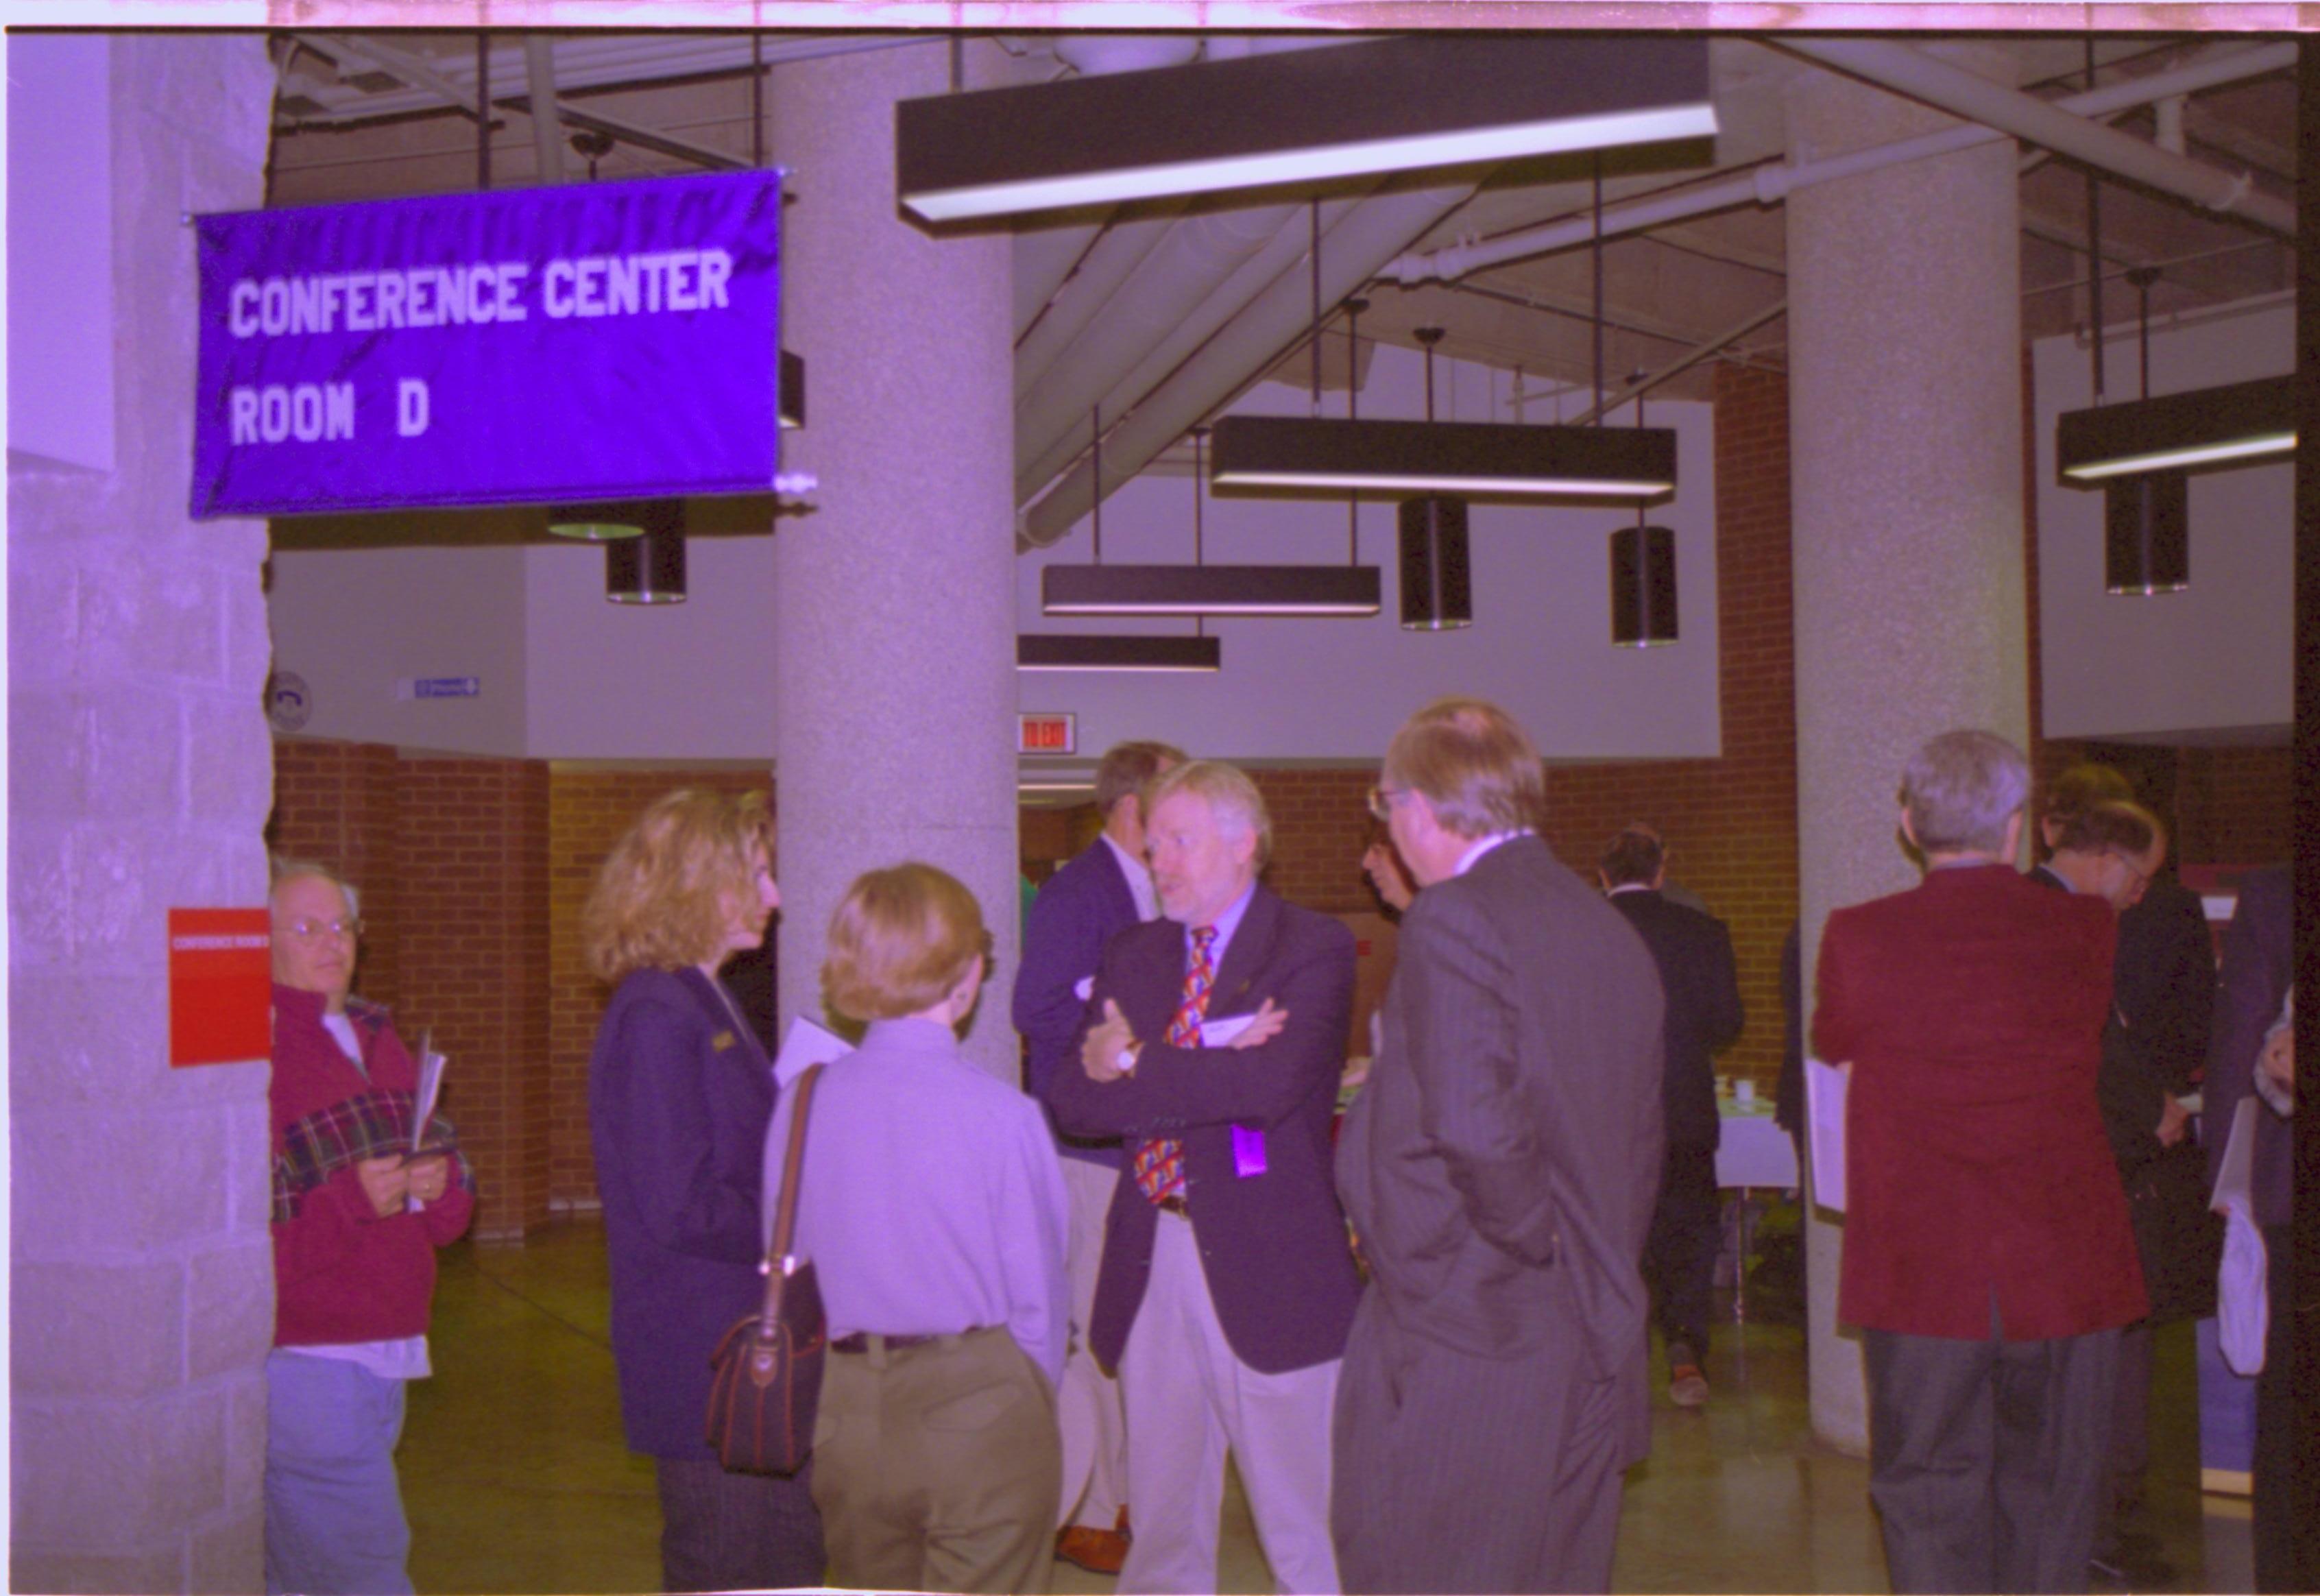 Larry Blake speaking with Pitcaithley and staff of Grant NHS 3-1997 Colloq (color); 30 Colloquium, 1997